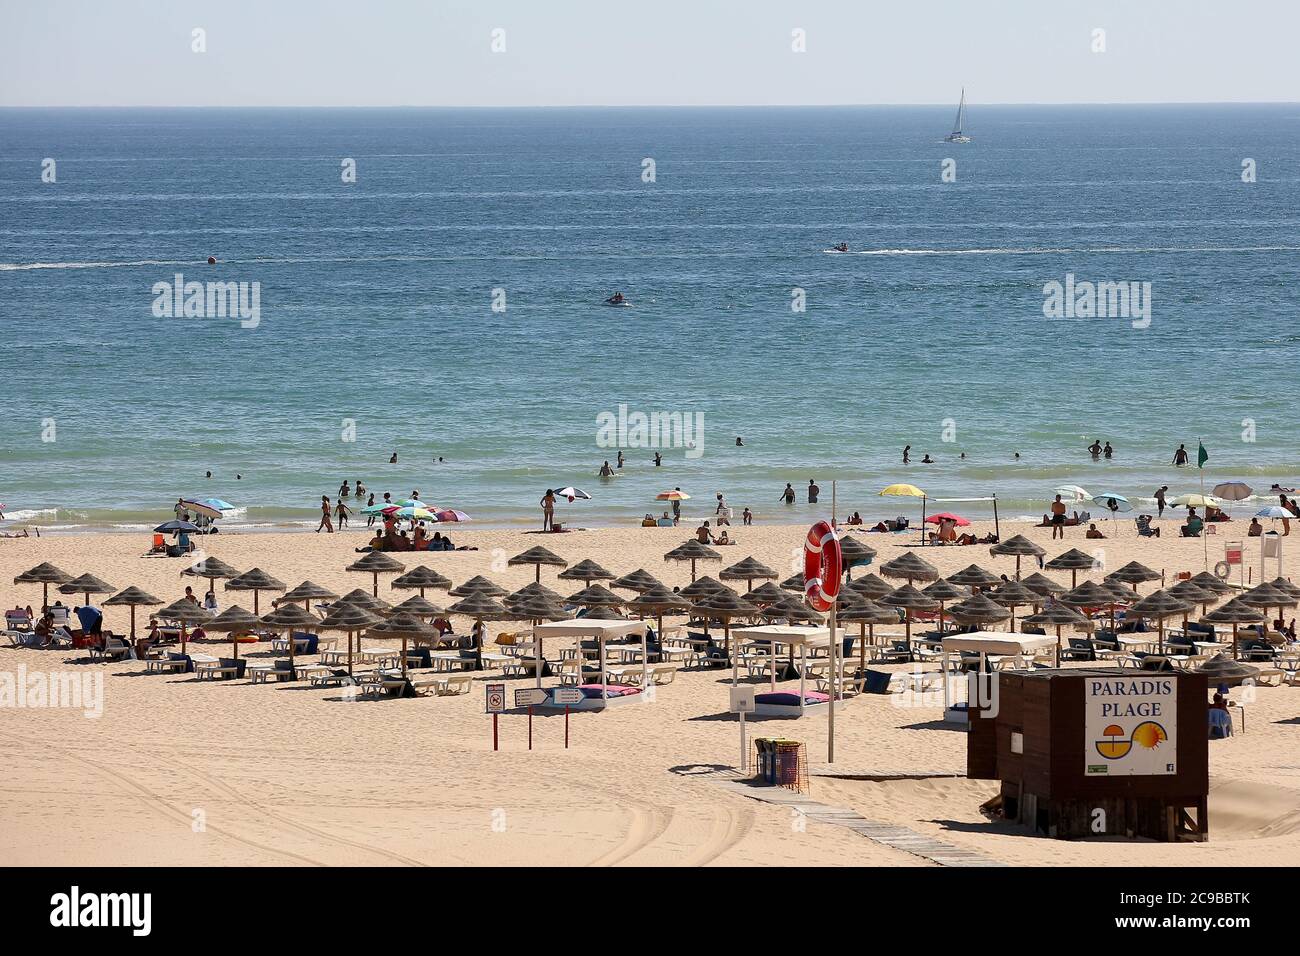 Algarve, Portugal. 29th July, 2020. Beachgoers sunbathe and swim at a beach in Portimao, Algarve region, Portugal on July 29, 2020. Portuguese President Marcelo Rebelo de Sousa has promised to visit the Algarve every week this summer to help the regionÃs struggling tourism sector overcome the effects of the Covid-19 pandemic and the UK governmentÃs decision to include mainland Portugal in its Ã”travel blacklistÃ Credit: Pedro Fiuza/ZUMA Wire/Alamy Live News Stock Photo